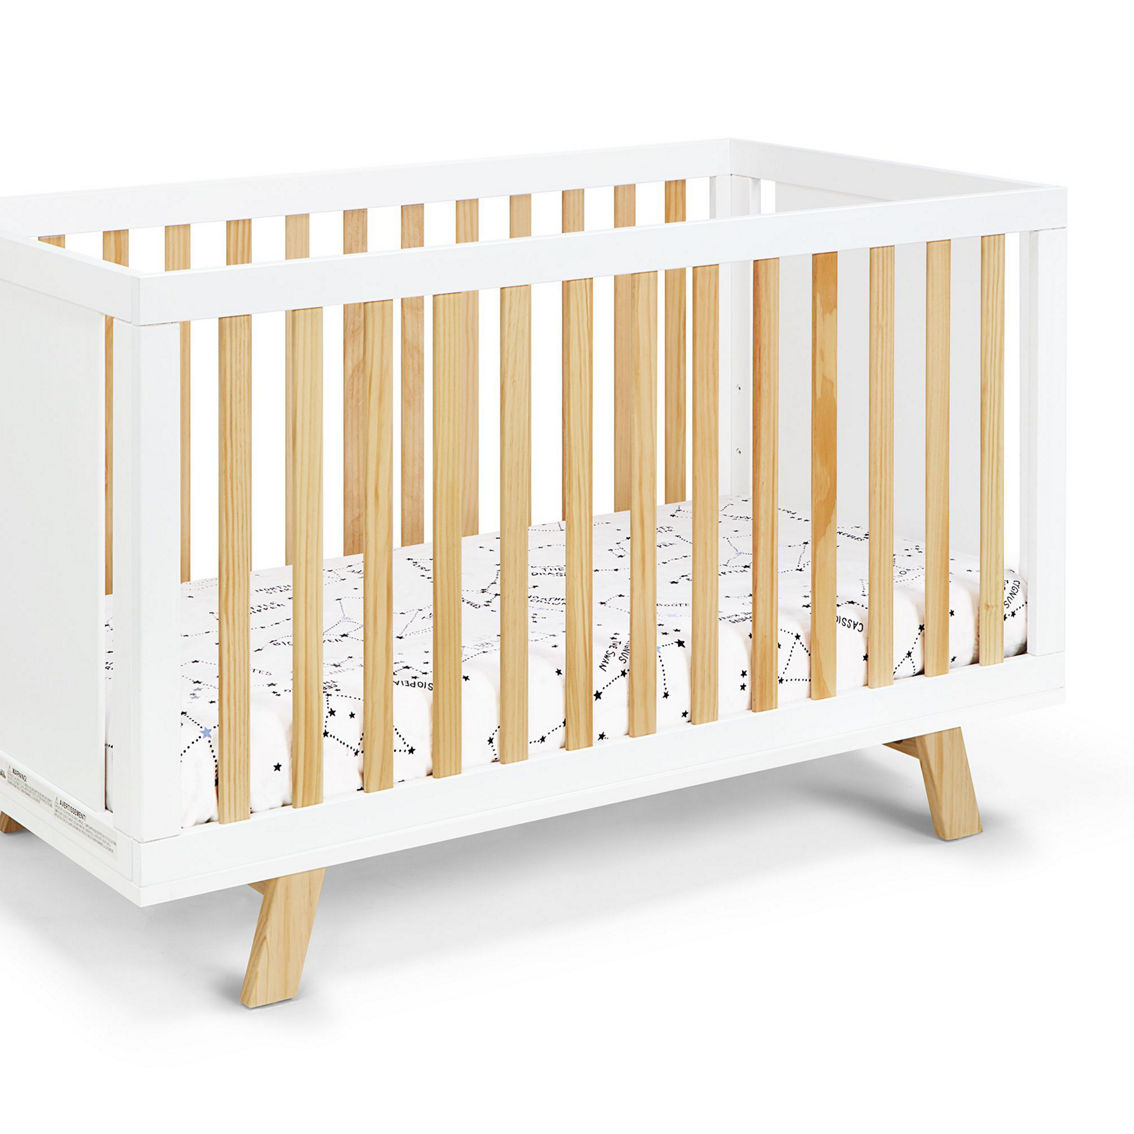 Suite Bebe Livia 3-in-1 Convertible Island Crib White/Natural - Image 3 of 5